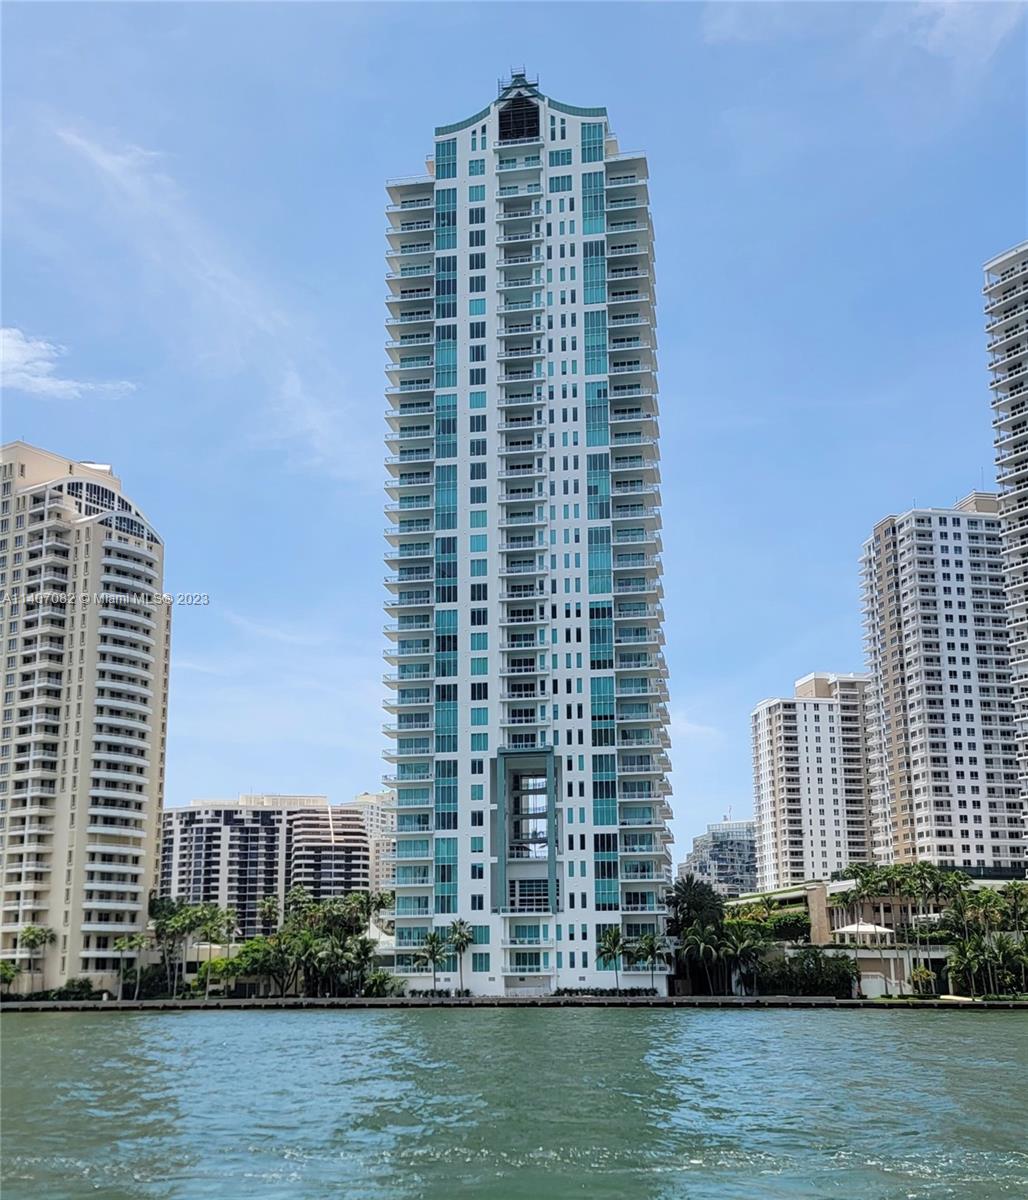 THE MOST PRIVATE & LUXURIOUS BOUTIQUE BUILDING IN THE HEART OF BRICKELL ON THE EXCLUSIVE ISLAND OF BRICKELL KEY. THIS BEAUTIFUL RESIDENCE HAS GORGEOUS VIEWS OF BAY AND MIAMI RIVER. THIS 2 BEDROOMS AND 2 & 1 HALF BATHS, PRIVATE FOYER, LARGE BALCONY, OPEN KITCHEN WITH MIELE AND SUBZERO, STORAGE, SPLIT FLOORPLAN, UPSCALE AMENITIES: POOL, HOT TUB, TENNIS COURT, 24 HOUR VALET PARKING SERVICE, CONCIERGE AND HIGH-TECH FITNESS CENTER, STEPS FROM RESTAURANTS & GROCERY STORE.